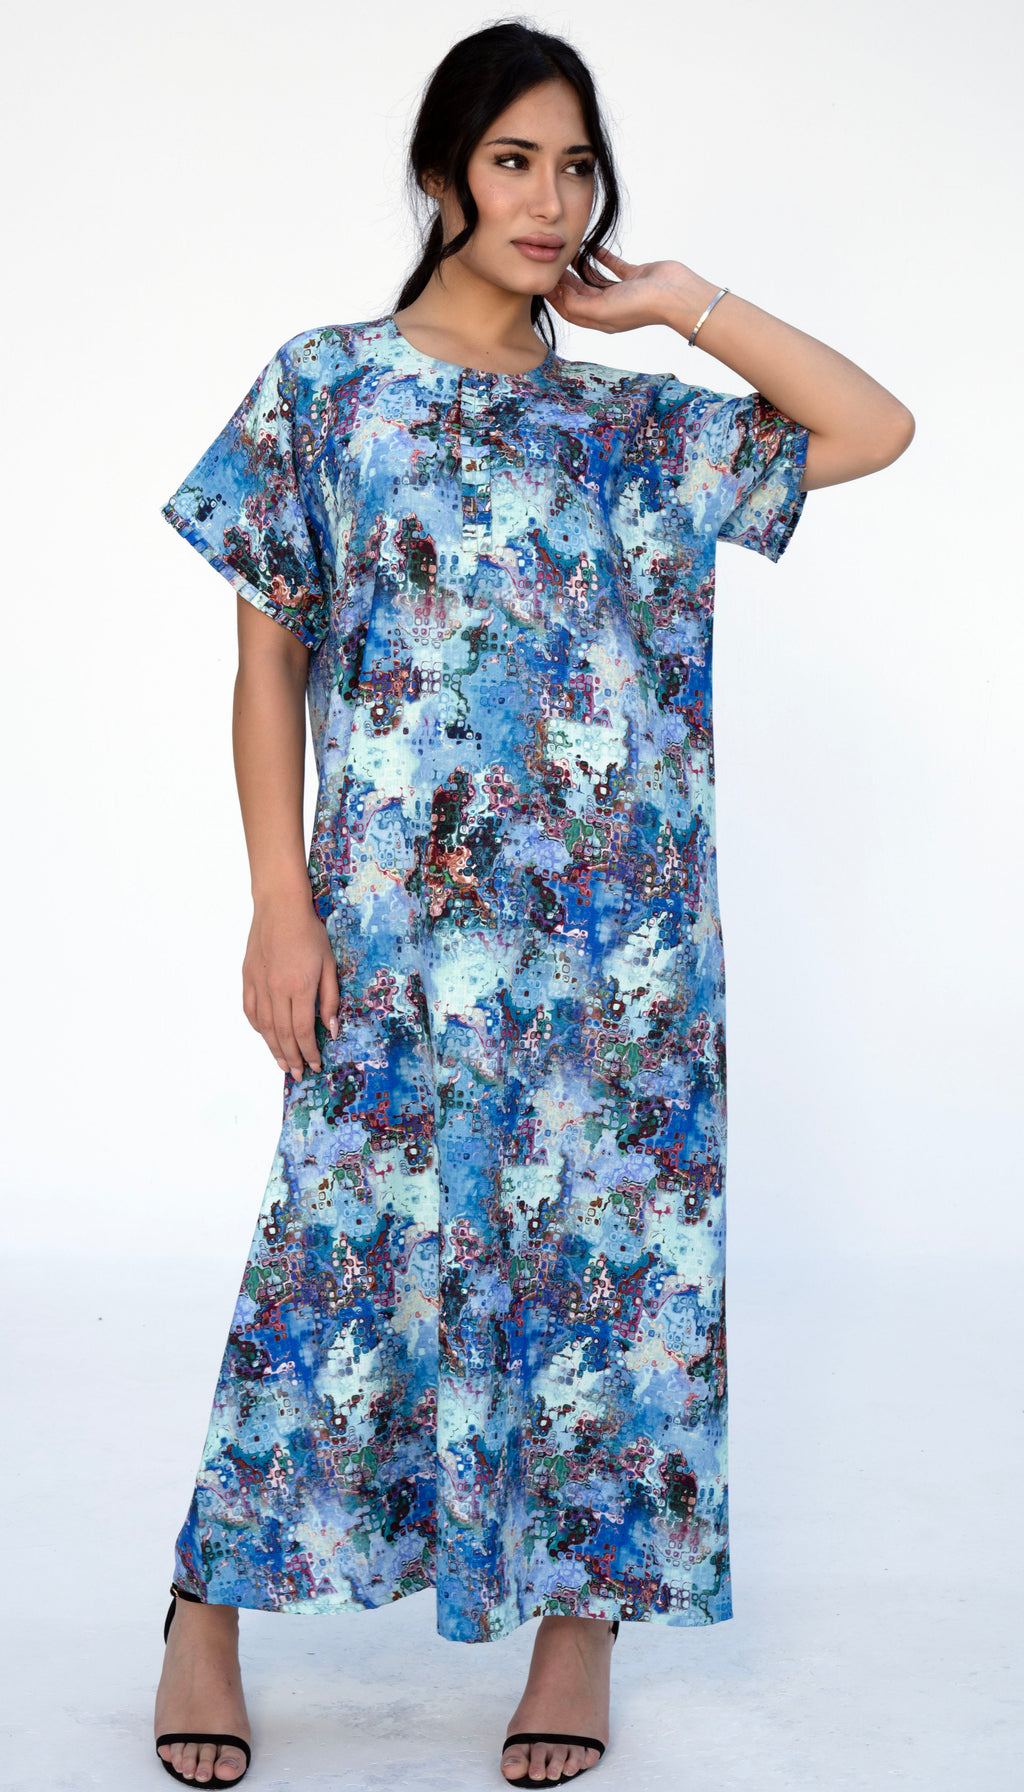 Floral Print Casual Wear With Simple Pleats in Front and Sleeves